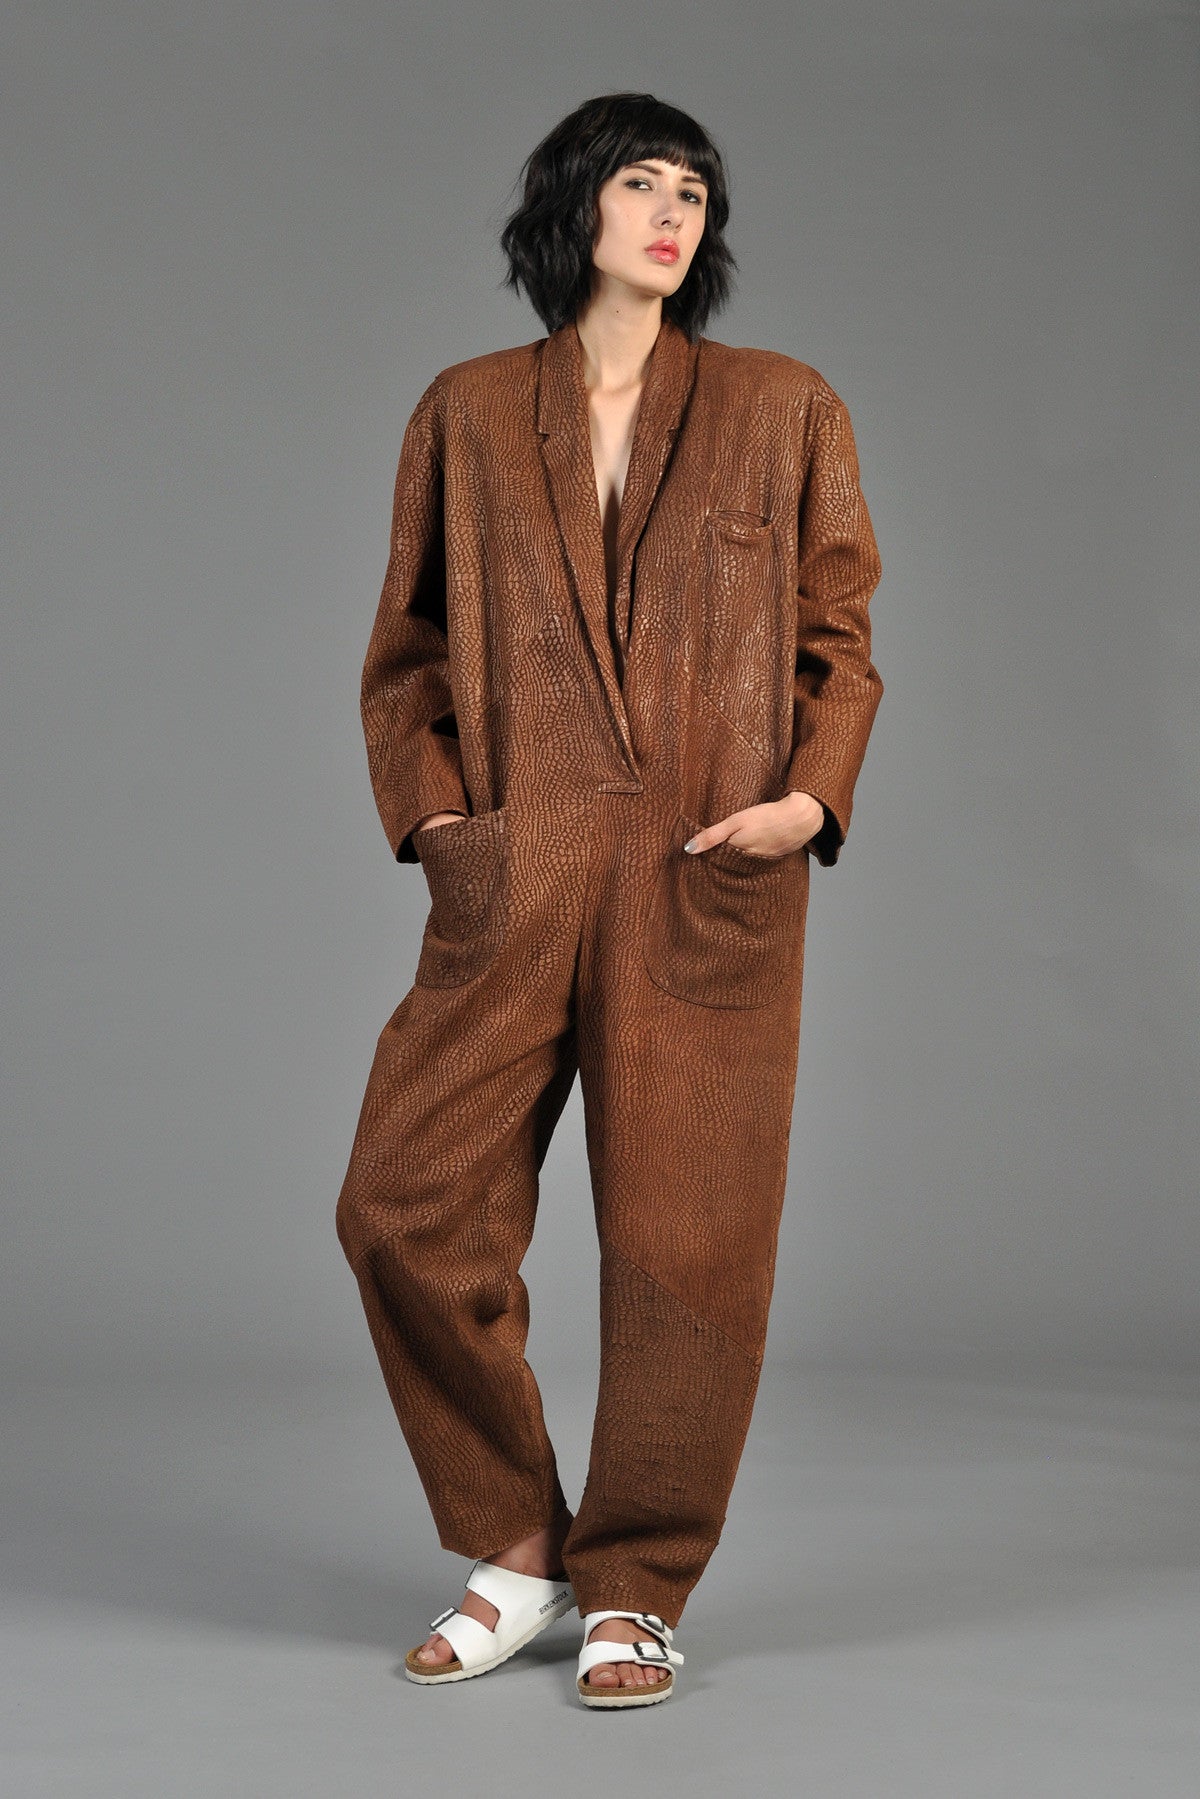 Norma Kamali Early OMO Reptile Patterned Leather Jumpsuit